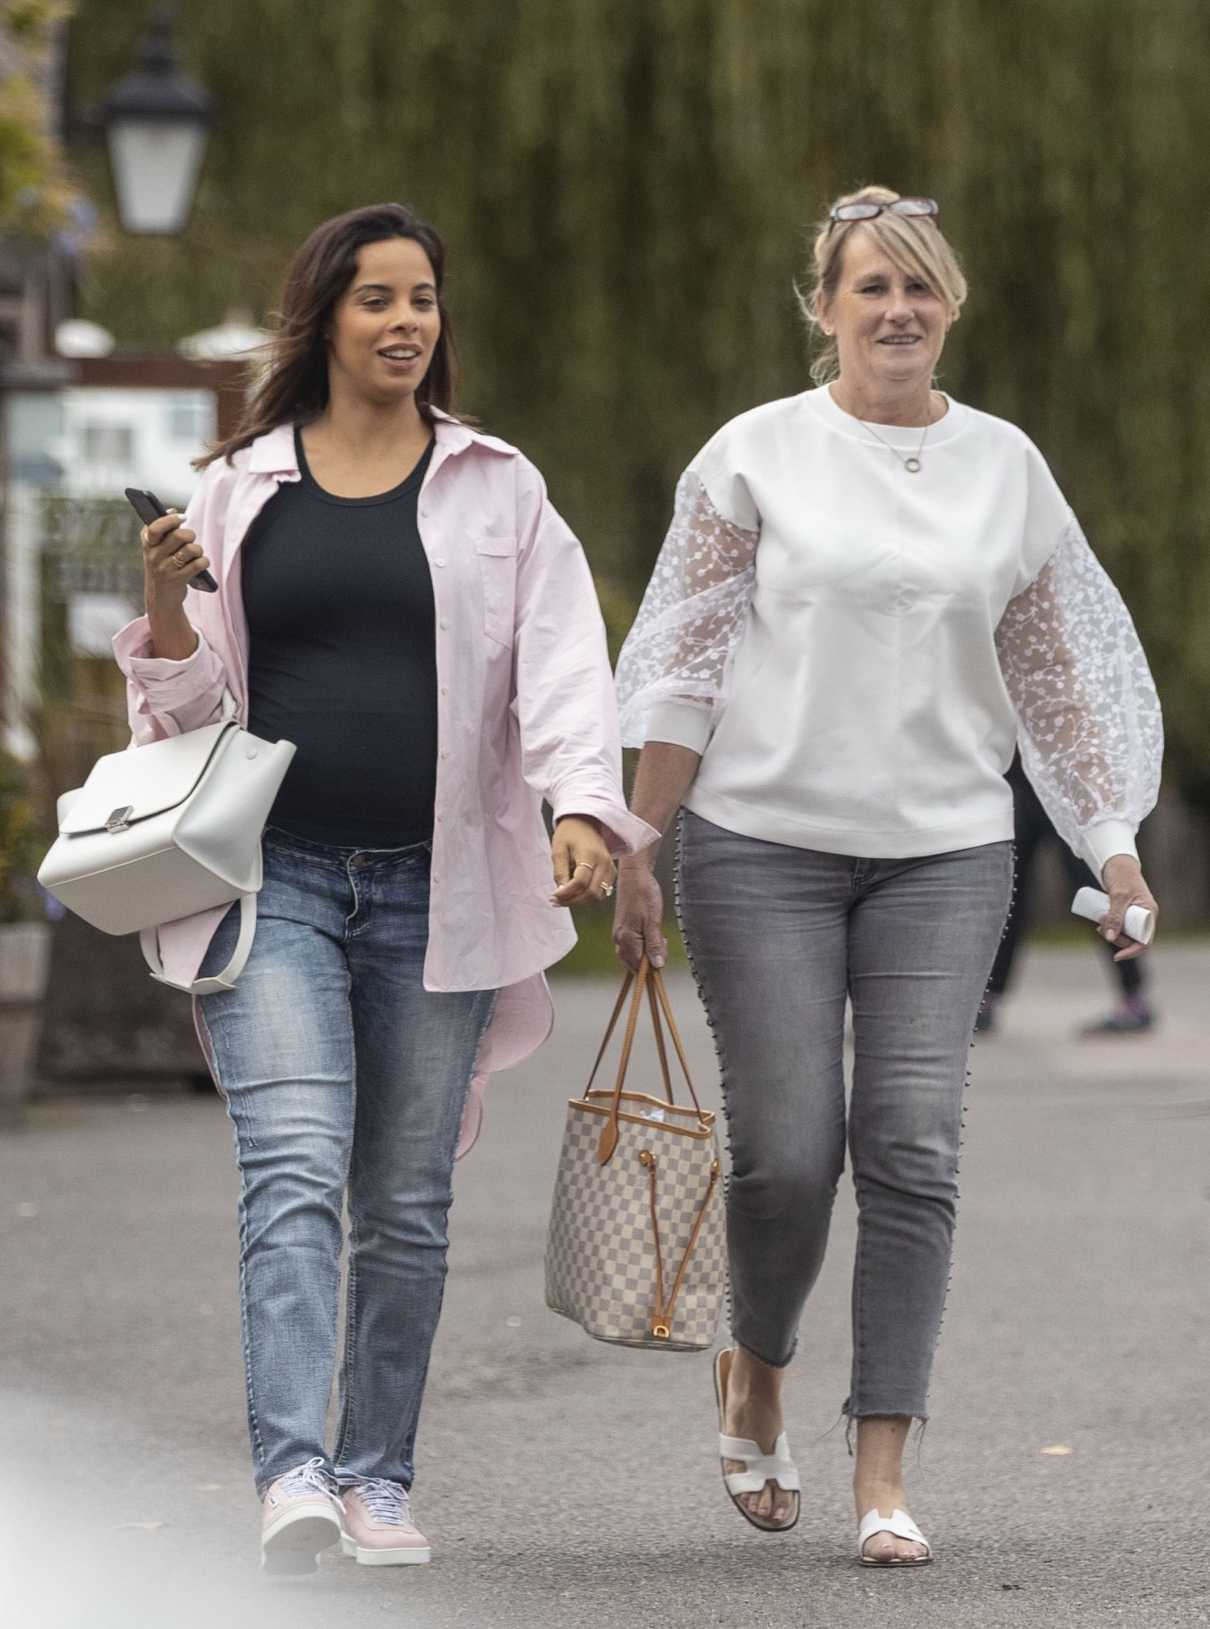 Rochelle Humes in a Pink Shirt